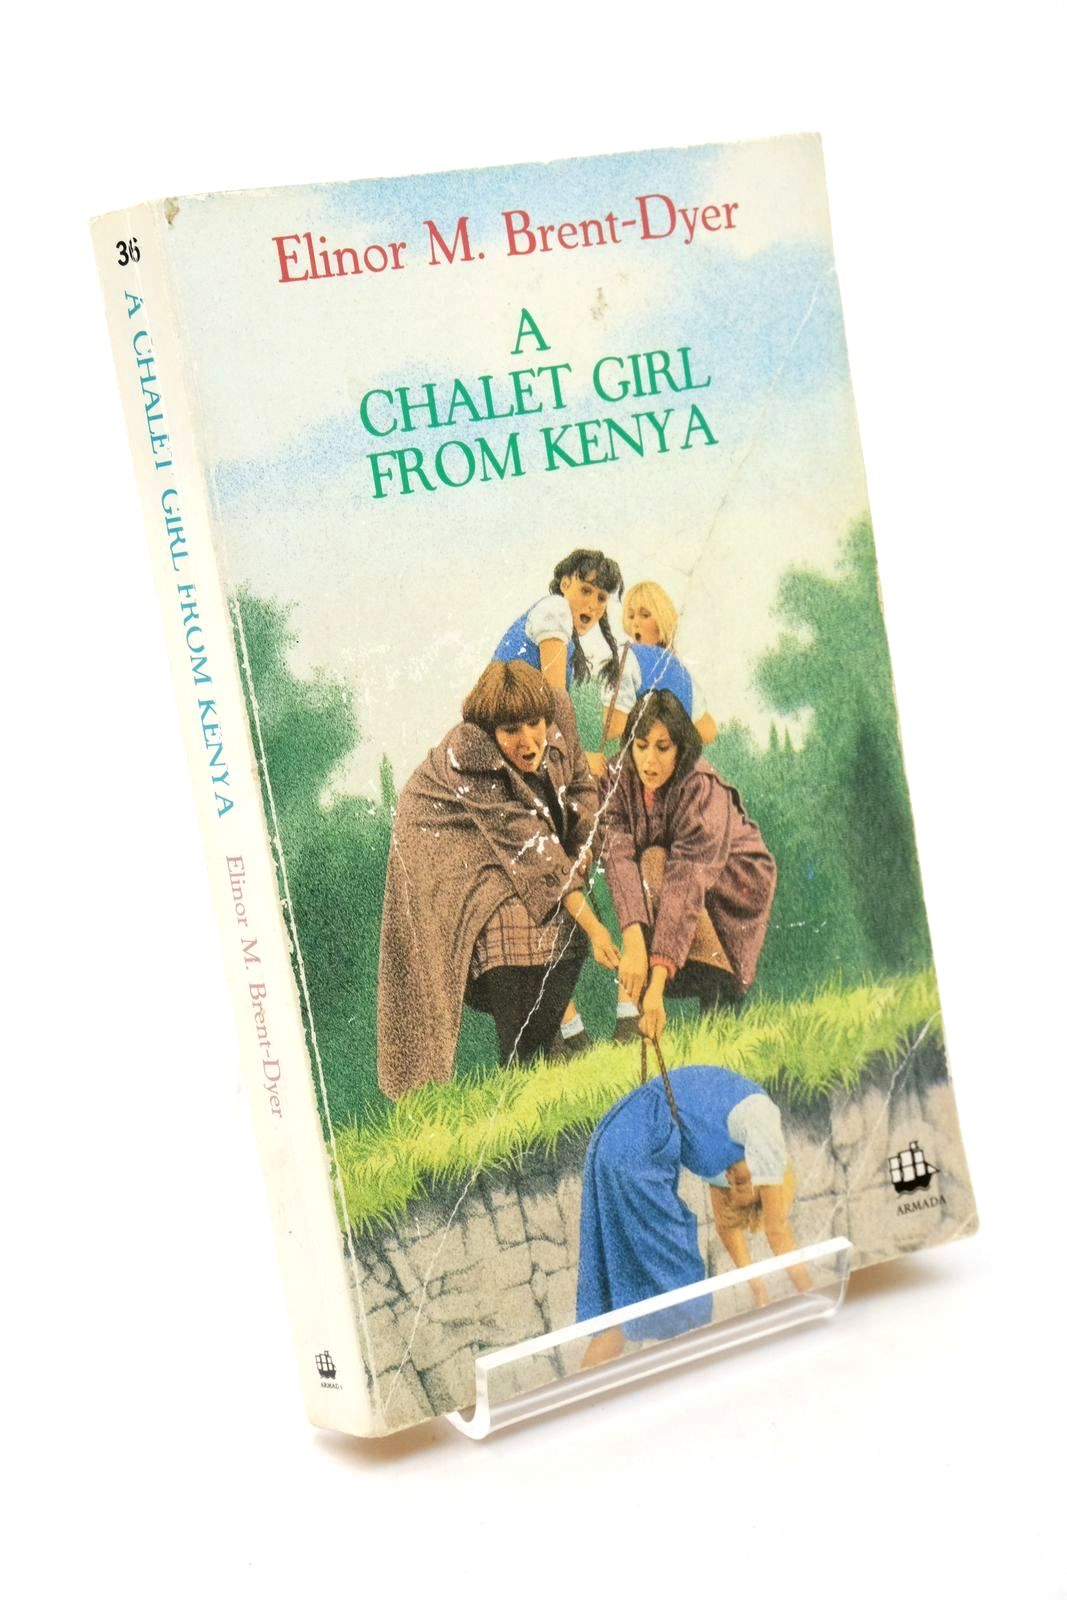 Photo of A CHALET GIRL FROM KENYA written by Brent-Dyer, Elinor M. published by Armada (STOCK CODE: 1322571)  for sale by Stella & Rose's Books